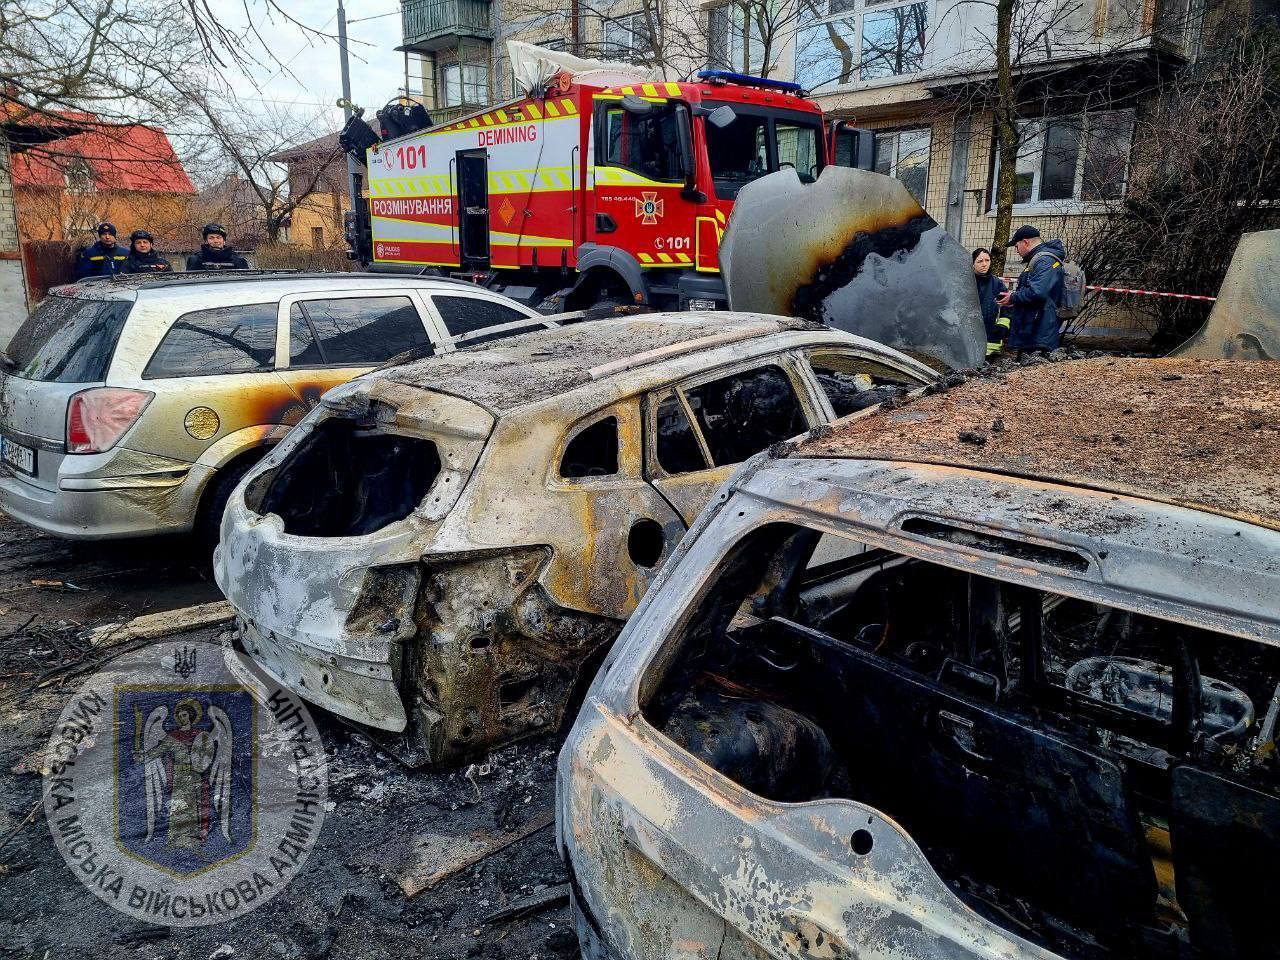 A crater at the site of the missile's impact and damaged buildings: the aftermath of the missile attack on Kyiv on March 21. Photo